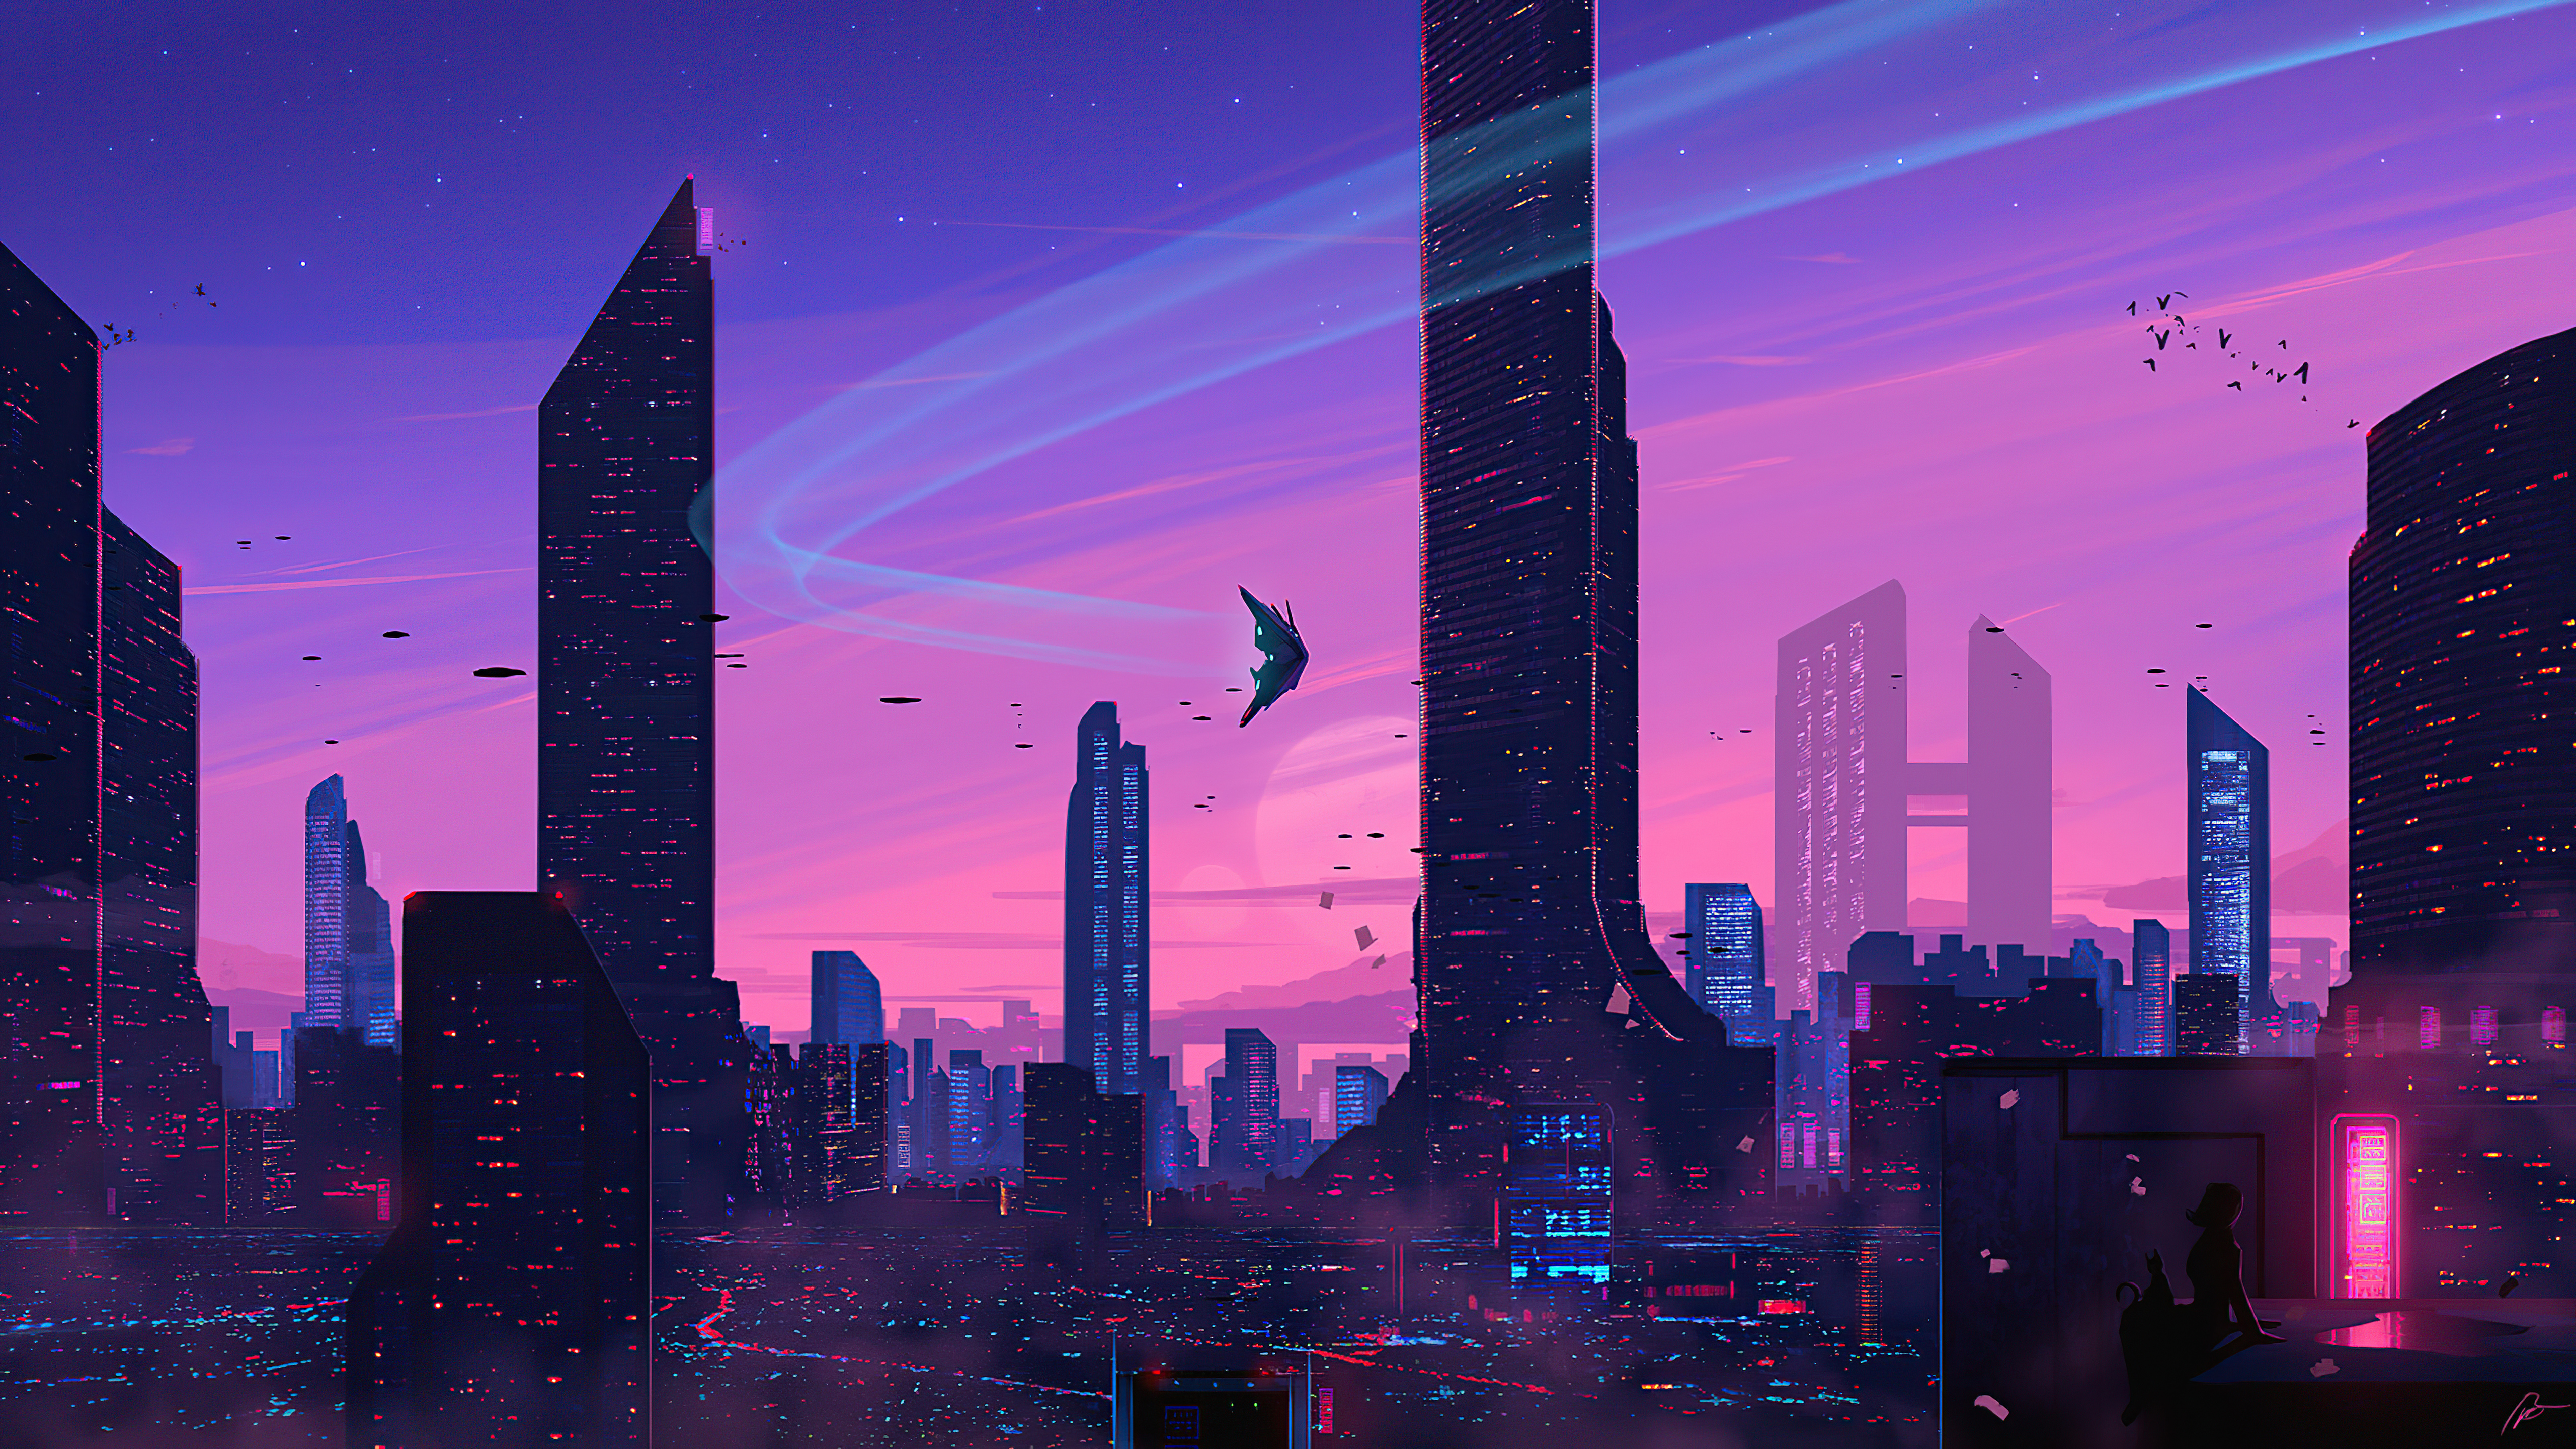 A city with tall buildings and flying objects - City, skyline, cityscape